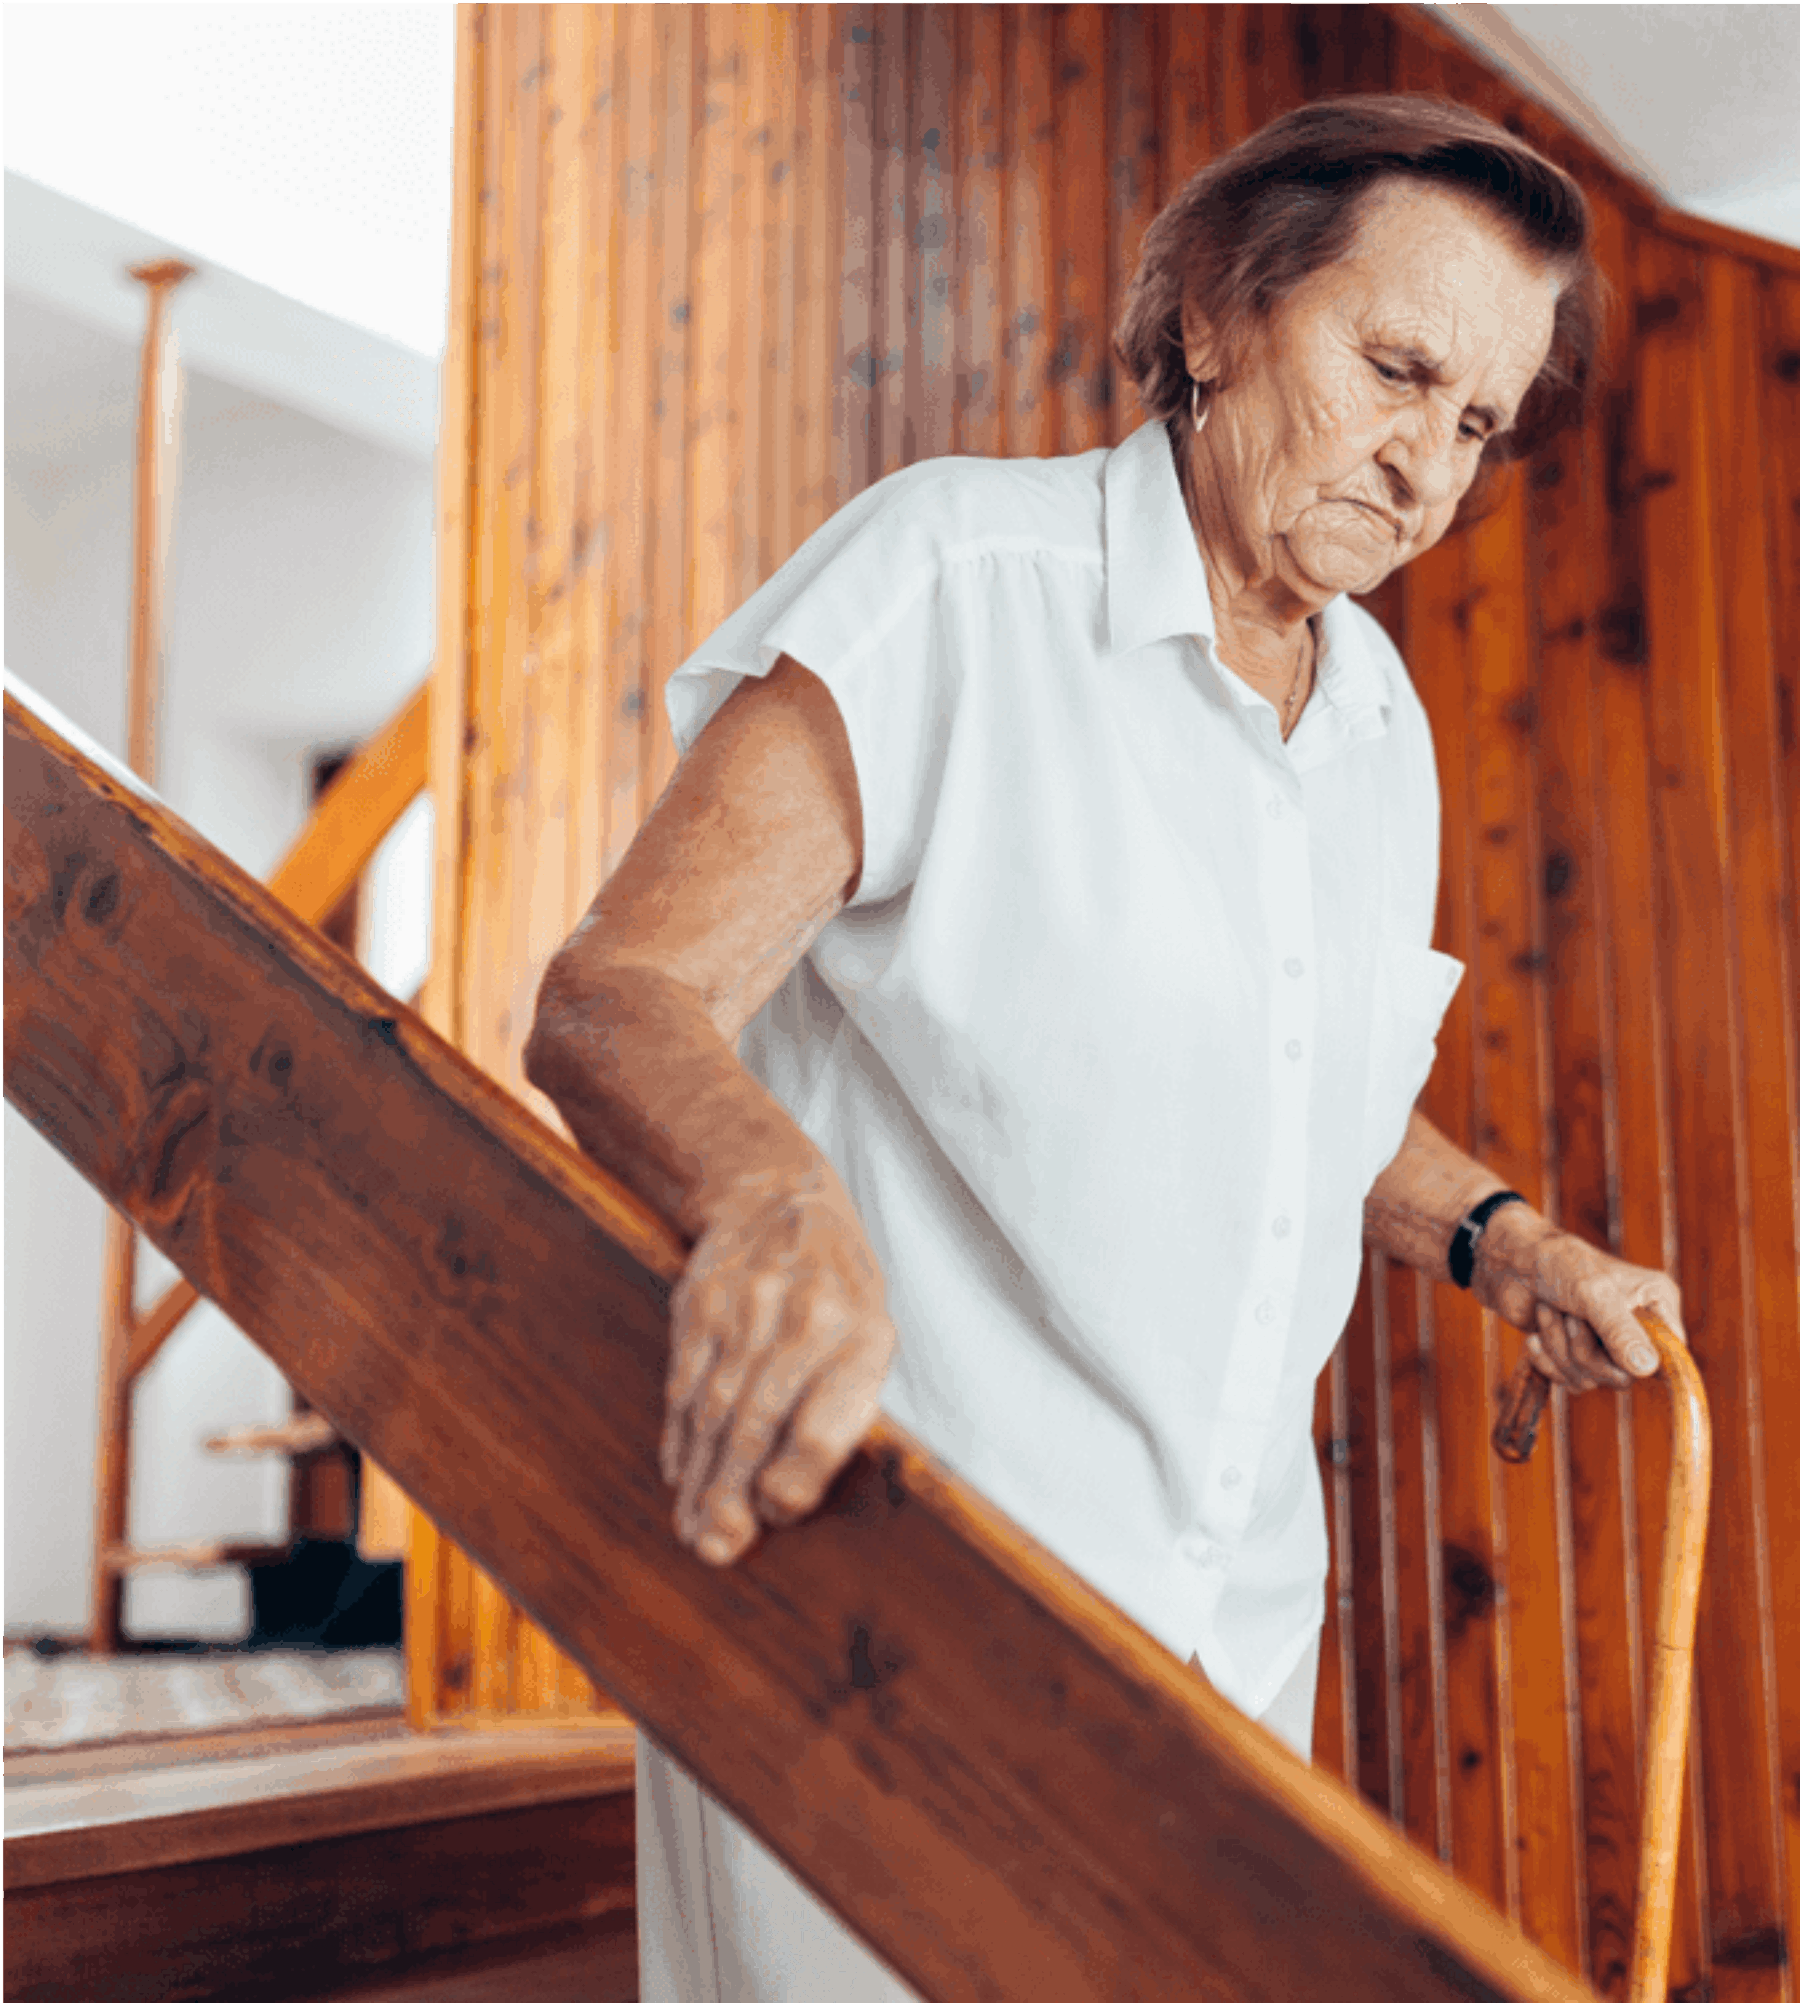 Adult woman going down a wooden staircase using a cane.